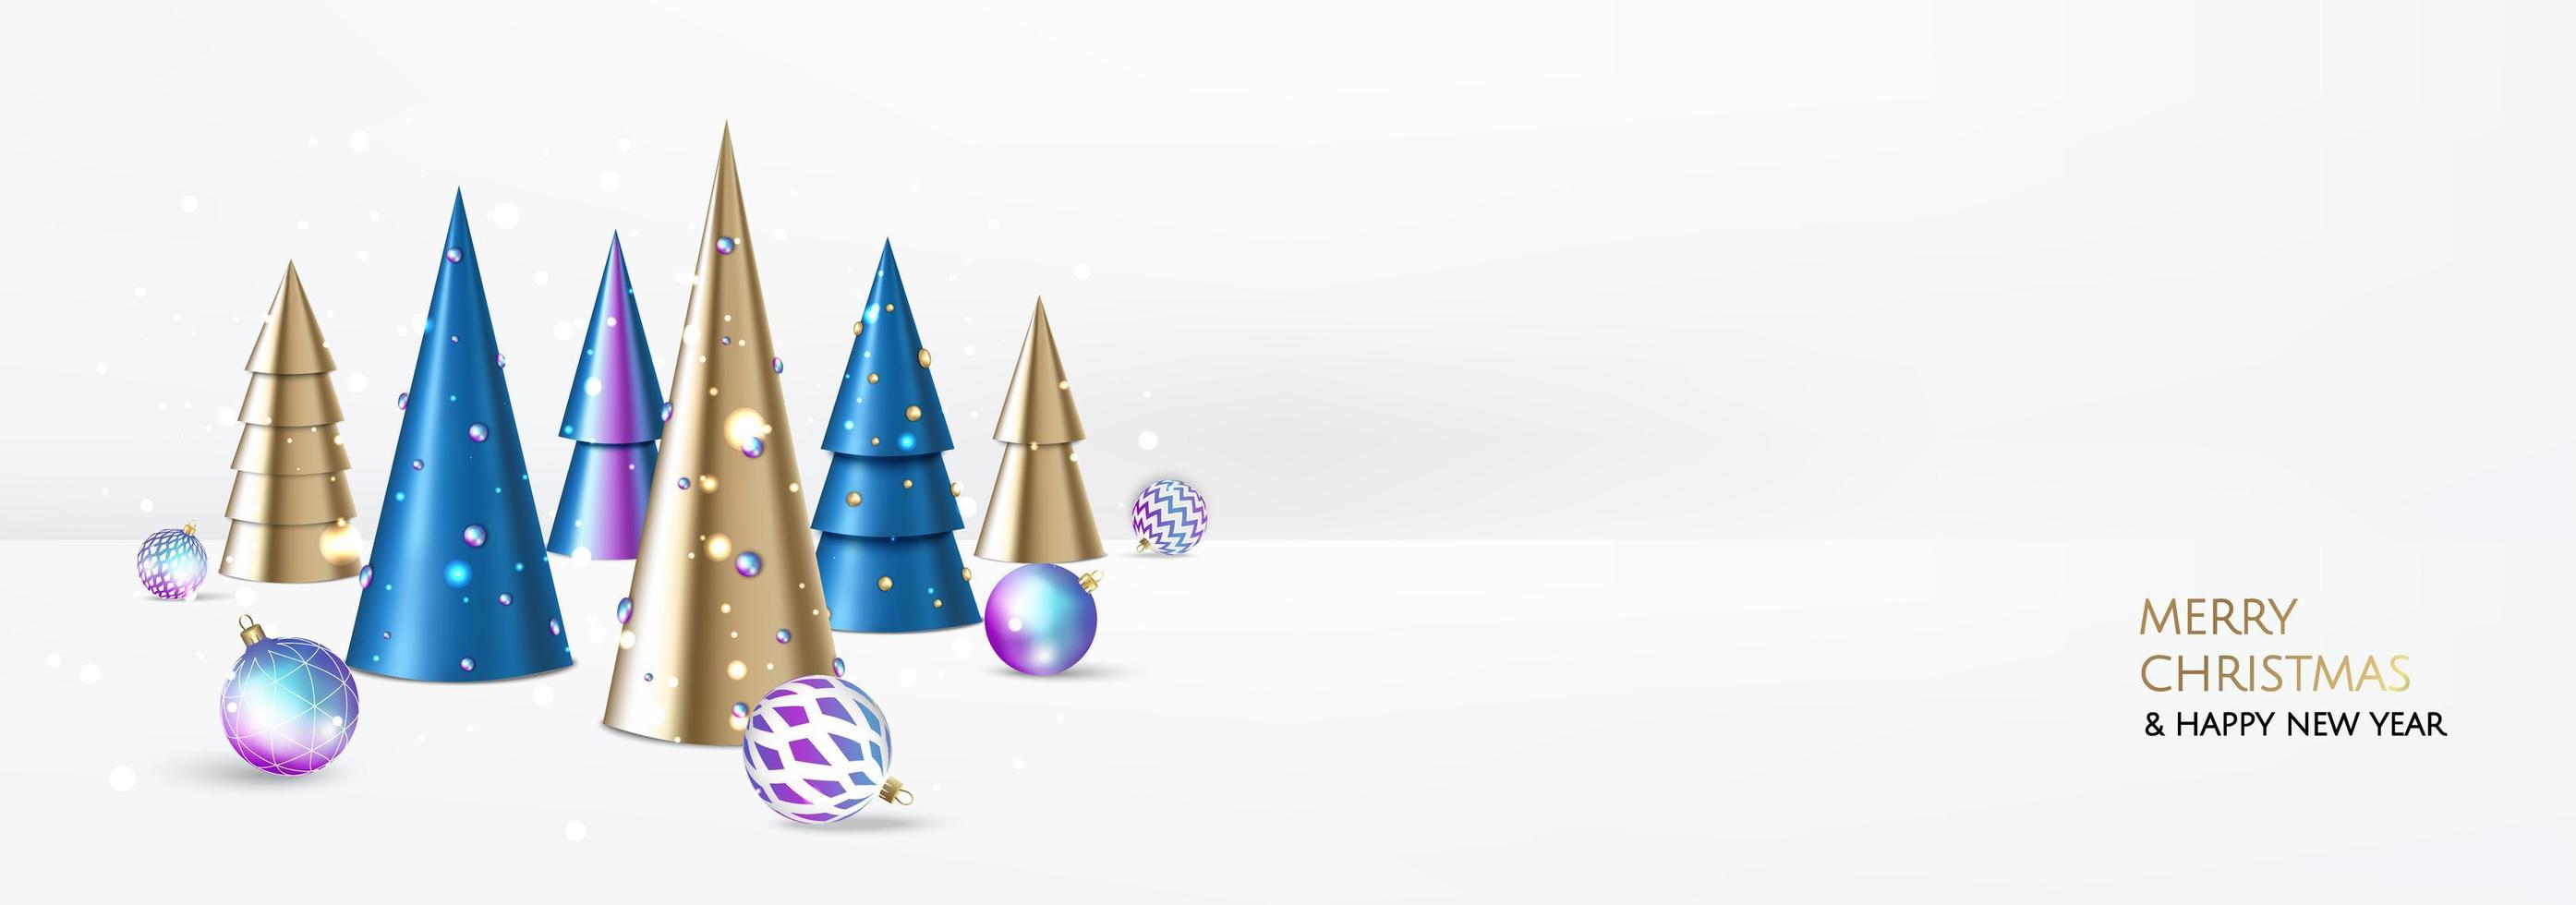 Merry Christmas and Happy New Year. Xmas Festive background with realistic 3d objects, blue and gold balls, conical christmas tree. Levitation falling design composition. vector